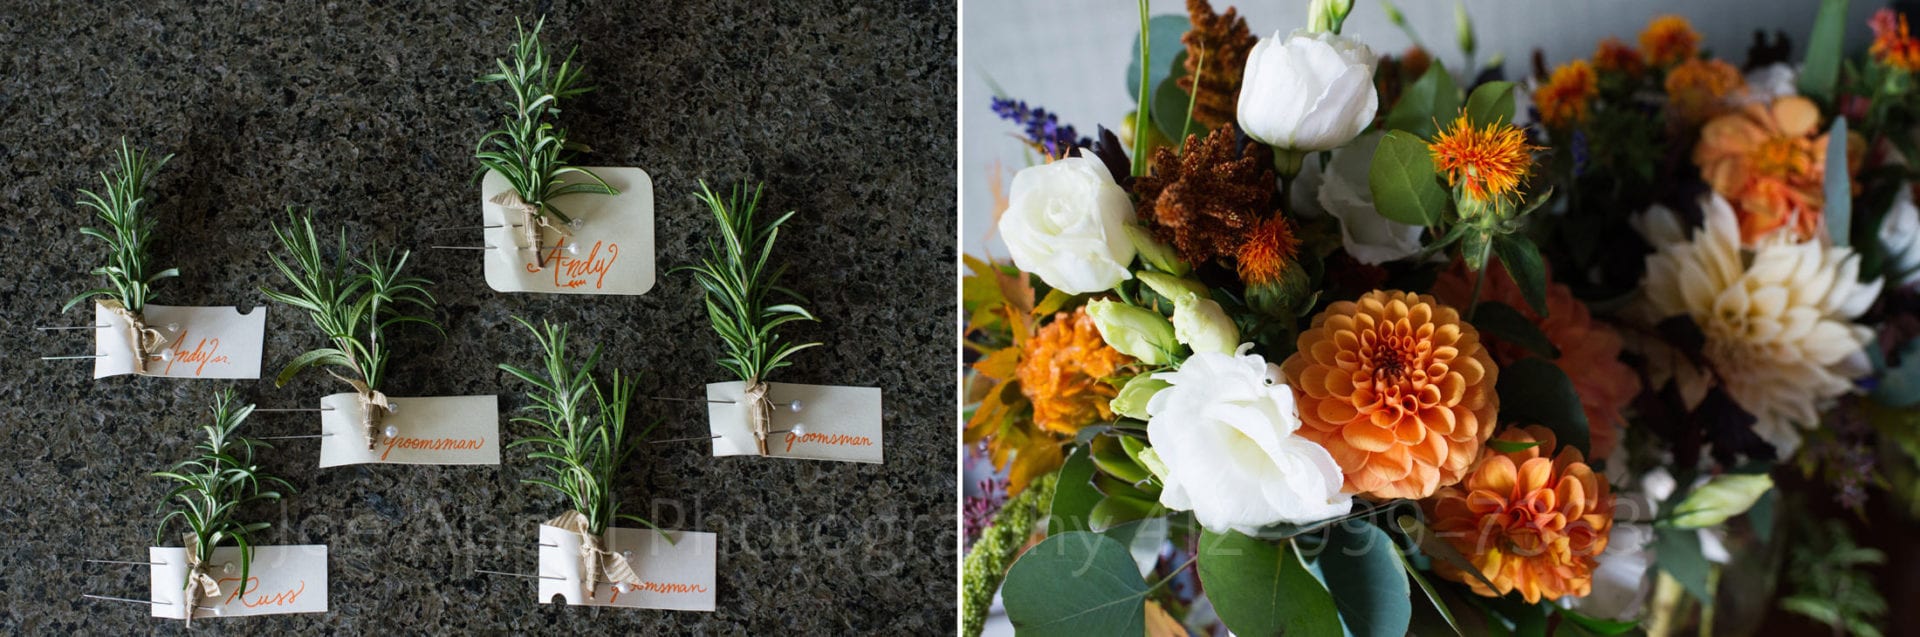 Two photos: one is a bunch of labeled boutonnieres made of sprigs of rosemary. The other is a bouquet with orange and white flowers. 